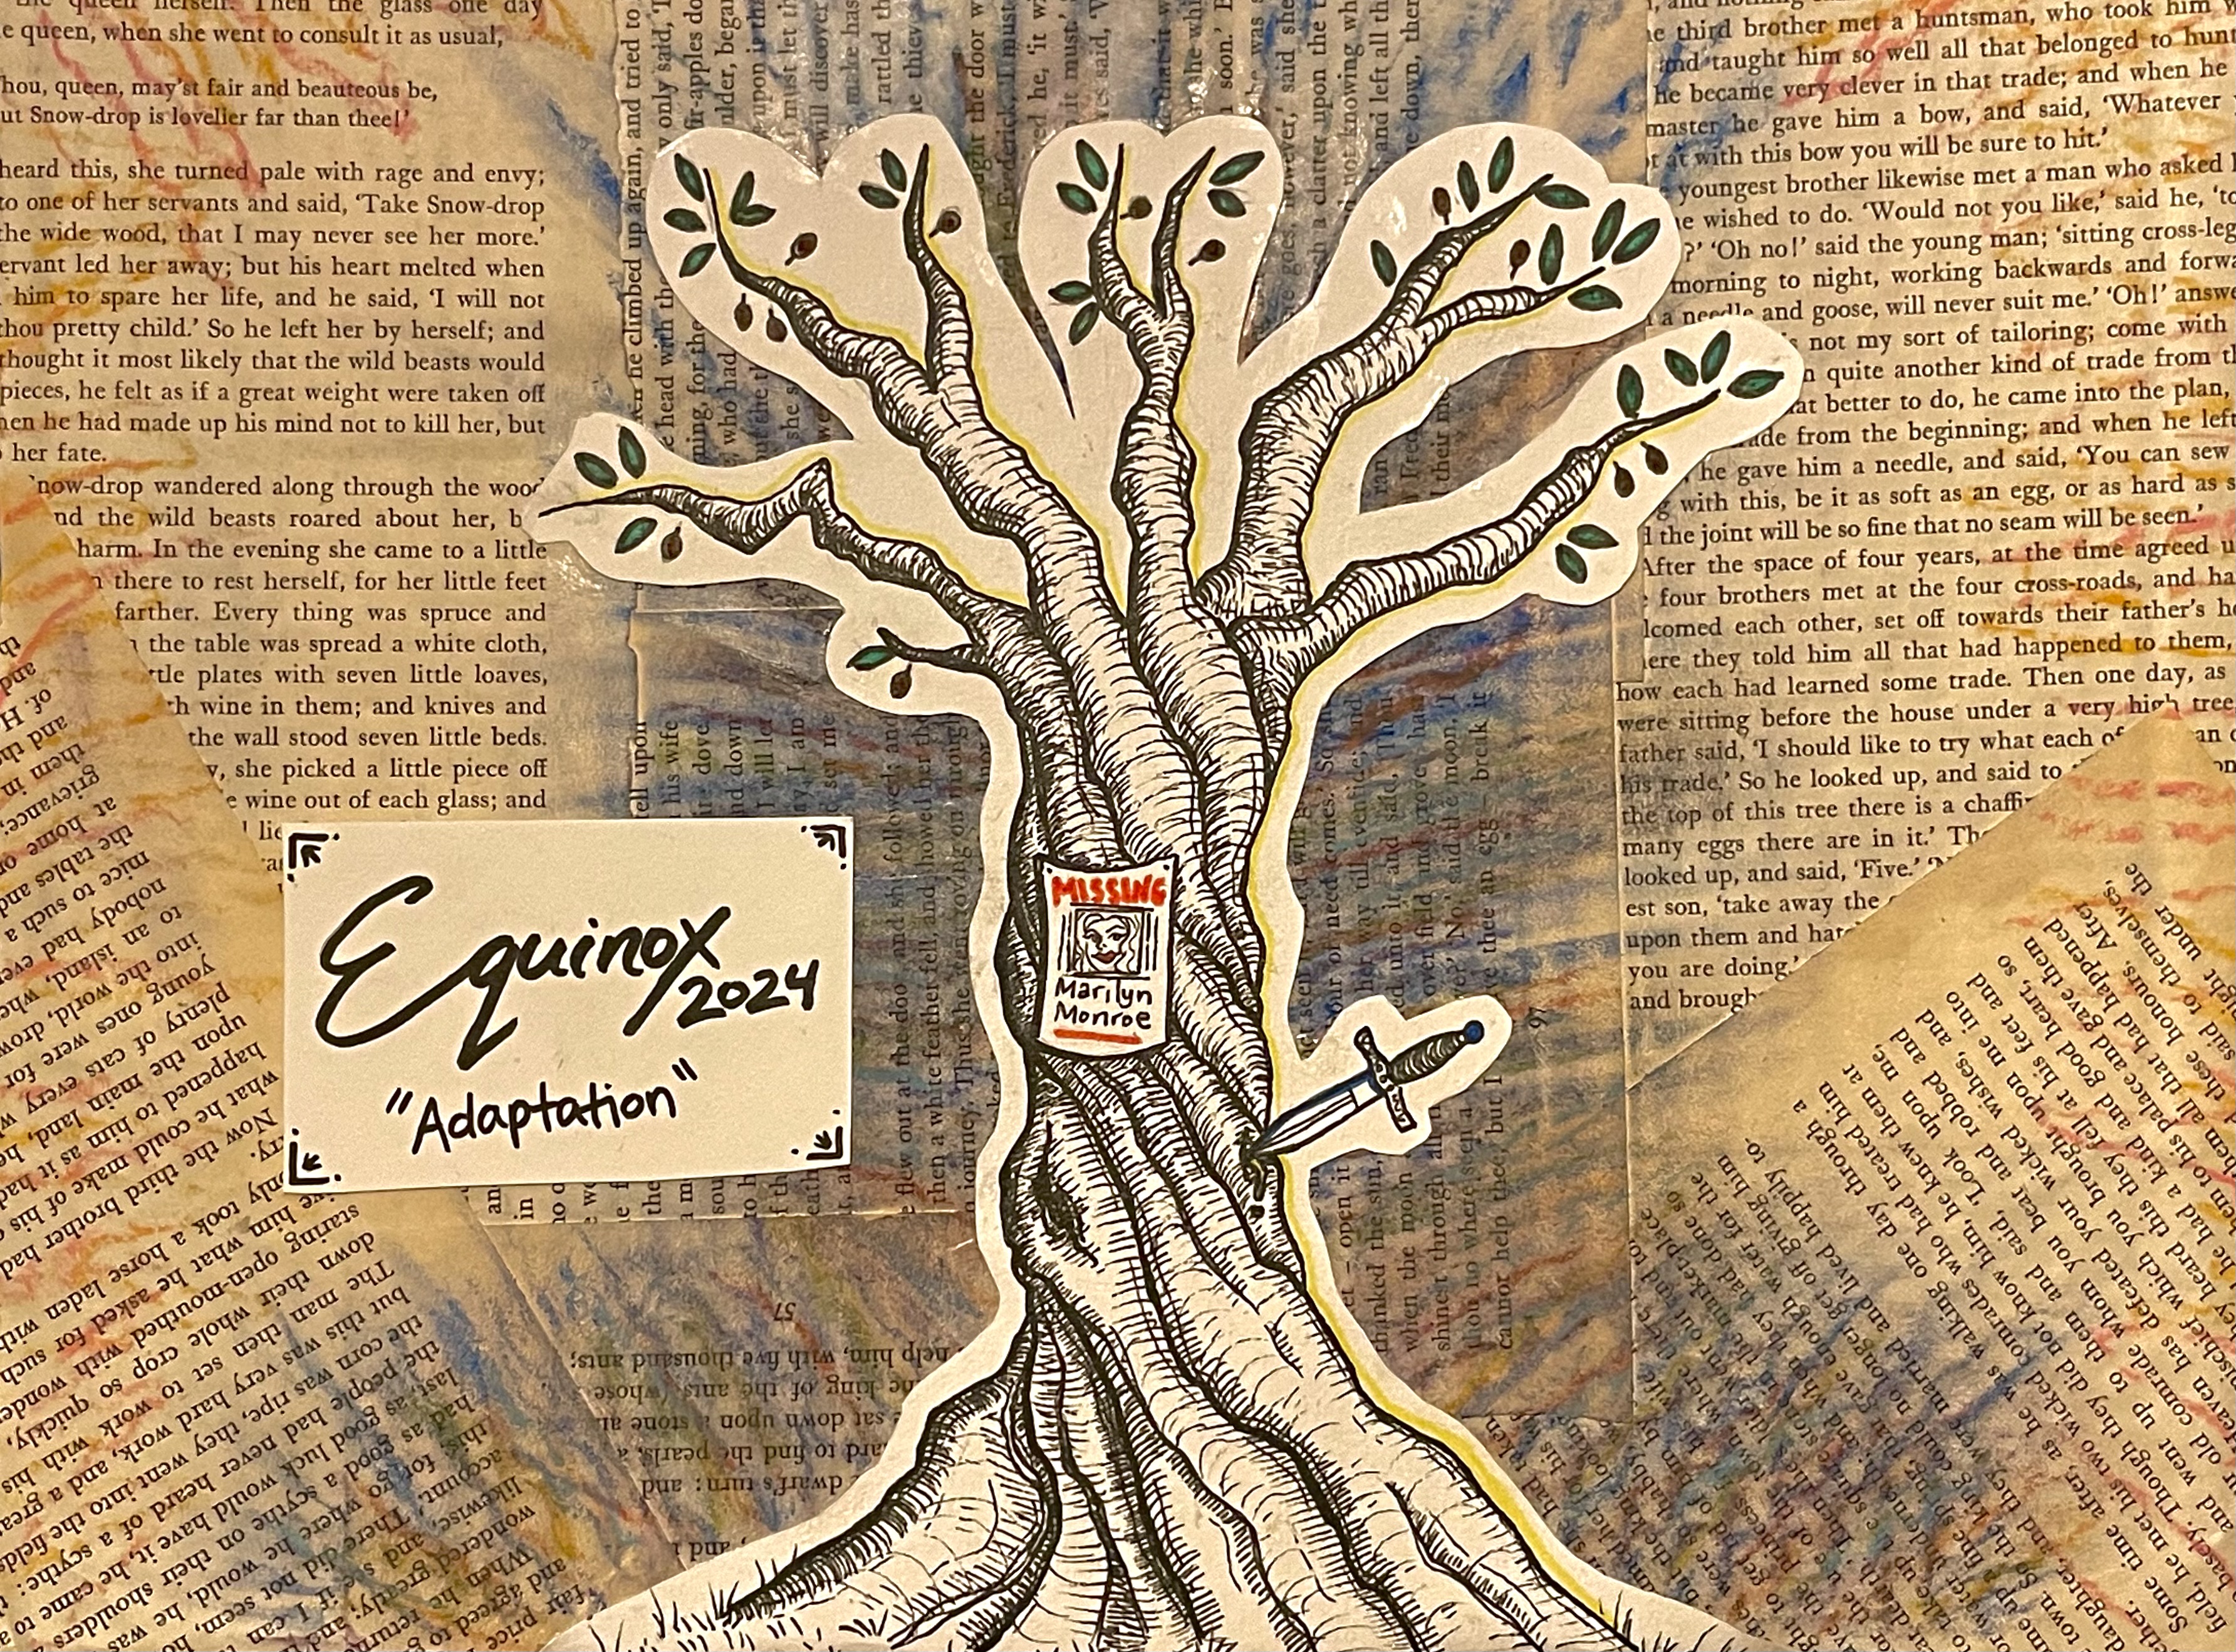  Book pages in the background with various colors drawn on top including orange, yellow, and blue. In the foreground is an illustrated tree with a dagger piercing the side. On the front is a Missing poster with a person’s illustrated face that reads “Missing Marilyn Monroe”. To the left is a brown box that has “Equinox 2024 ‘Adaptation’” written in it. 